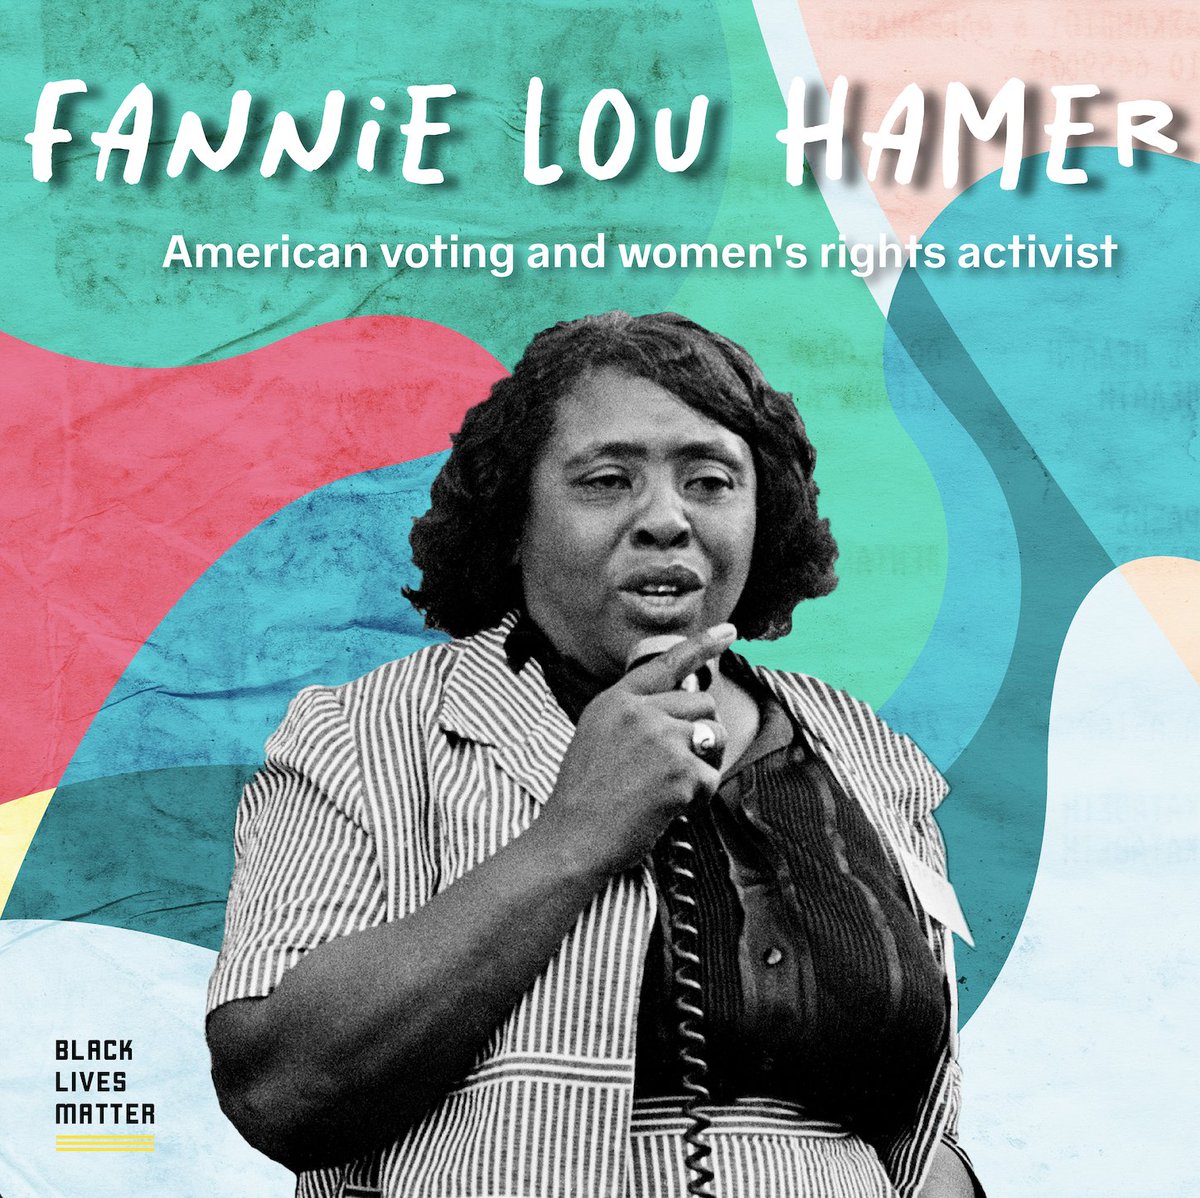 Fannie Lou Hamer is everything! Her political practices, antipoverty strategies, and community economic development were about creating a new system of sustainable Black liberation. Join us in honoring her life & legacy by fighting for the continued freedom we so justly deserve.